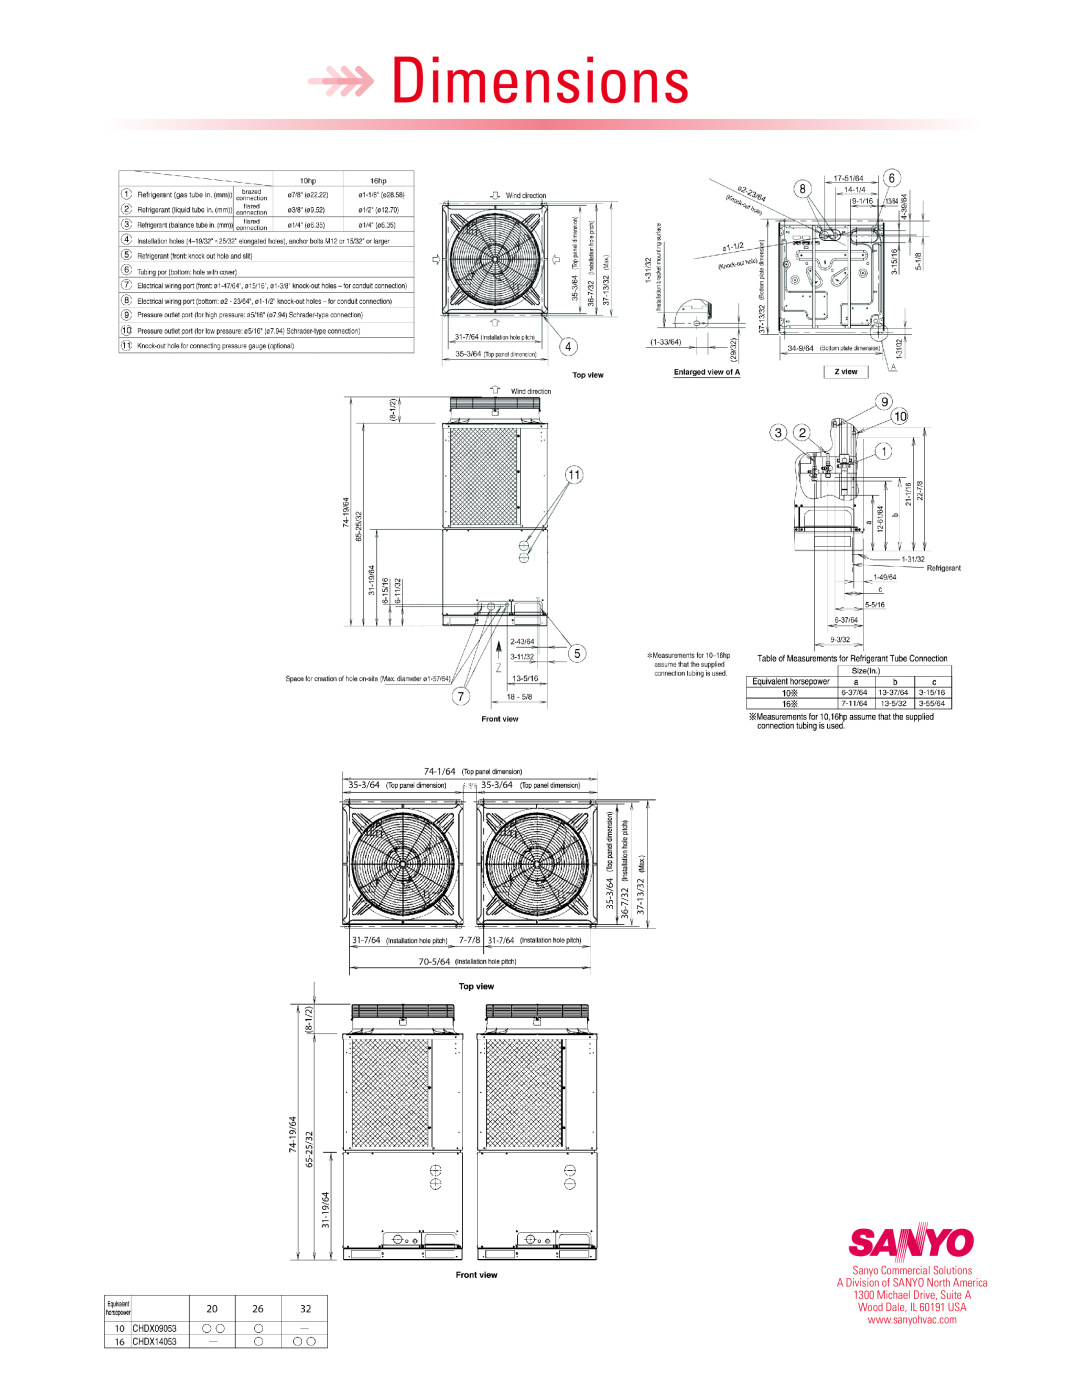 Sanyo WCHDX26053 warranty Dimensions, Sanyo Commercial Solutions, A Division of SANYO North America, Michael Drive, Suite A 